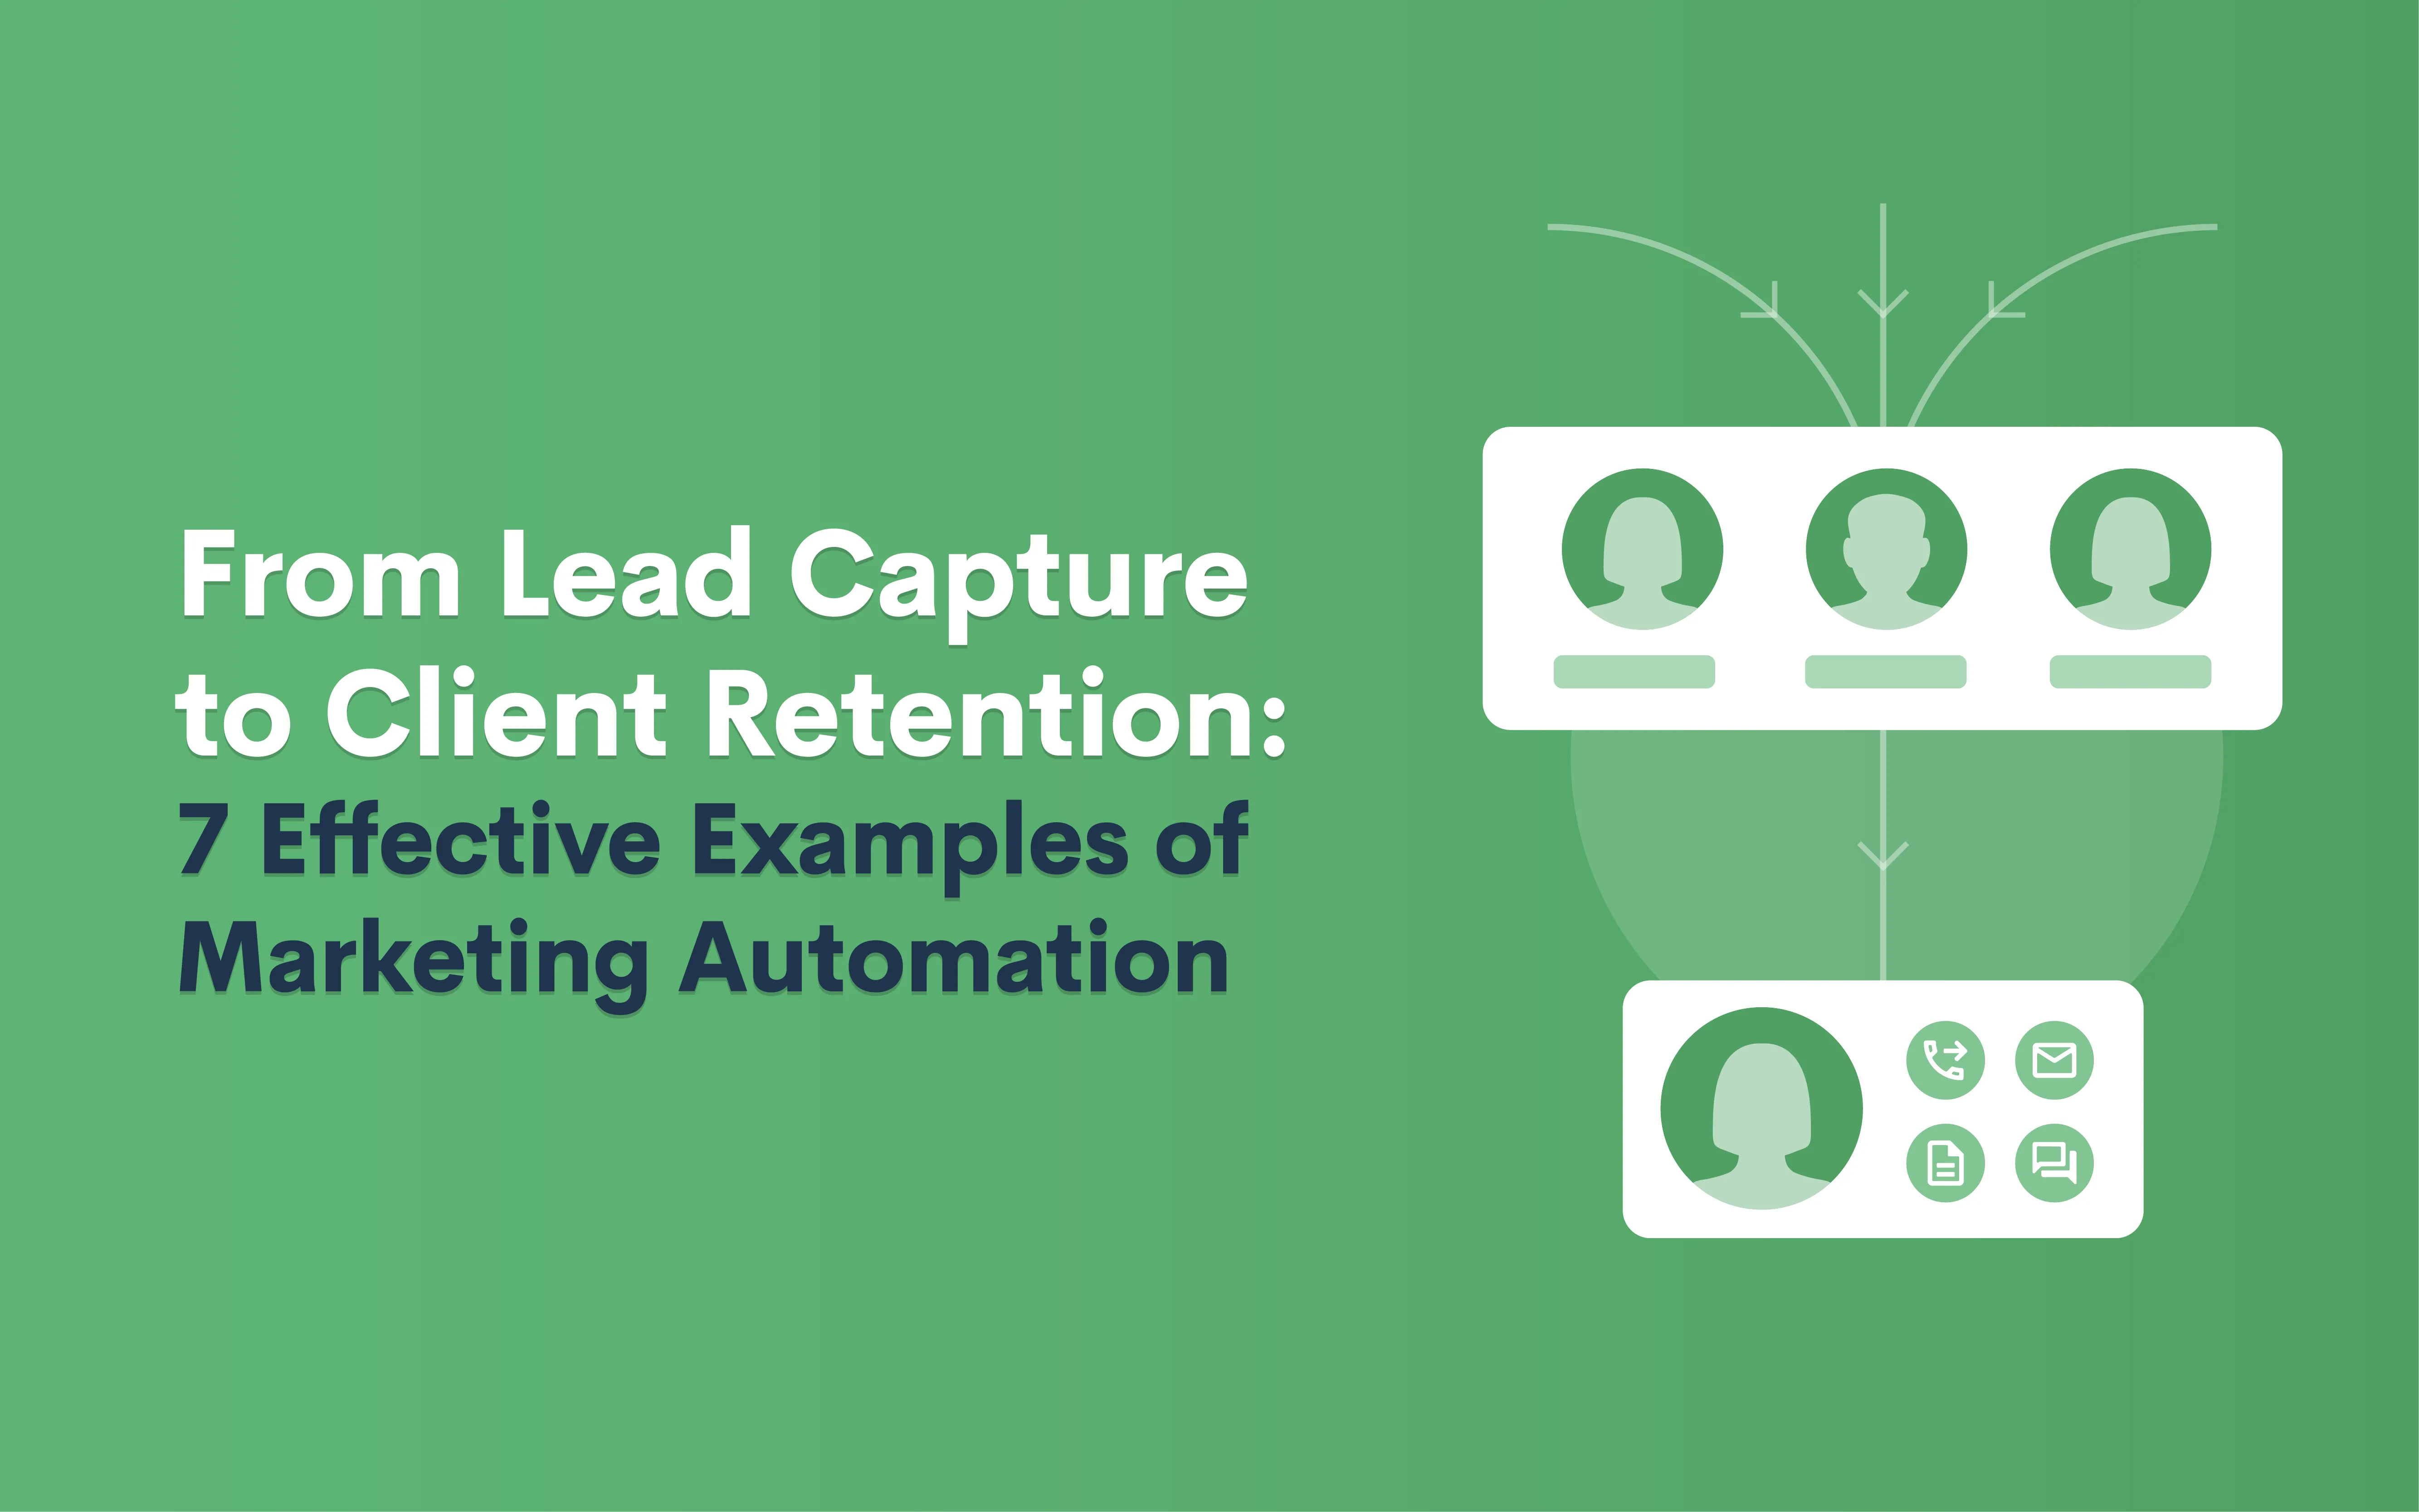 From Lead Capture to Client Retention: 7 Effective Examples of Marketing Automation